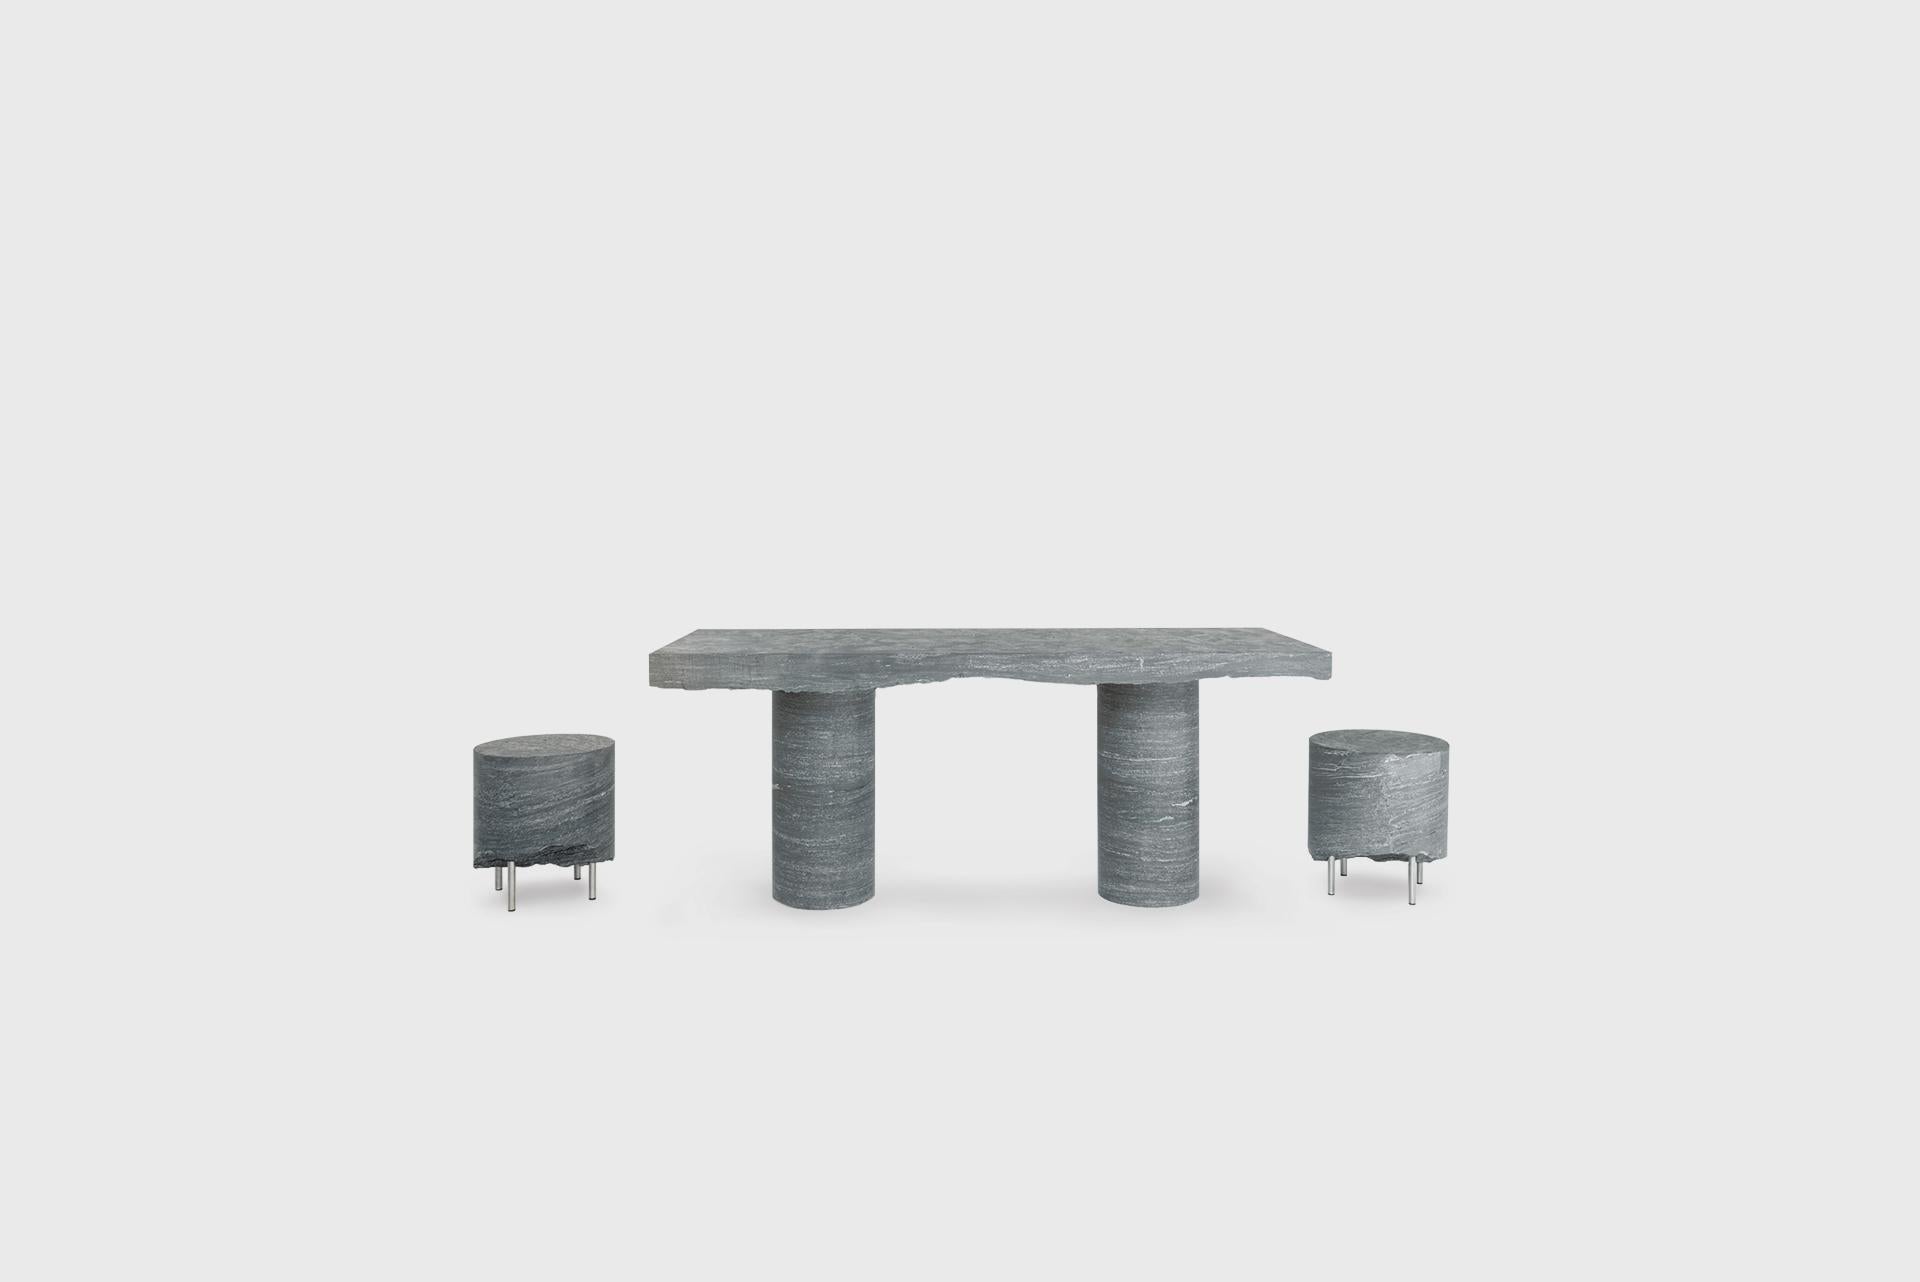 Sam Chermayeff
Stool
From the series “Concept Kitchen”
Produced in exclusive for SIDE GALLERY
Manufactured by Bagnara
Italy, 2020
Pannonia Grün marble
Contemporary Design

Measurements
40 cm x 40 cm x 45h cm
15,7 in x 15,7 in x 17,7h